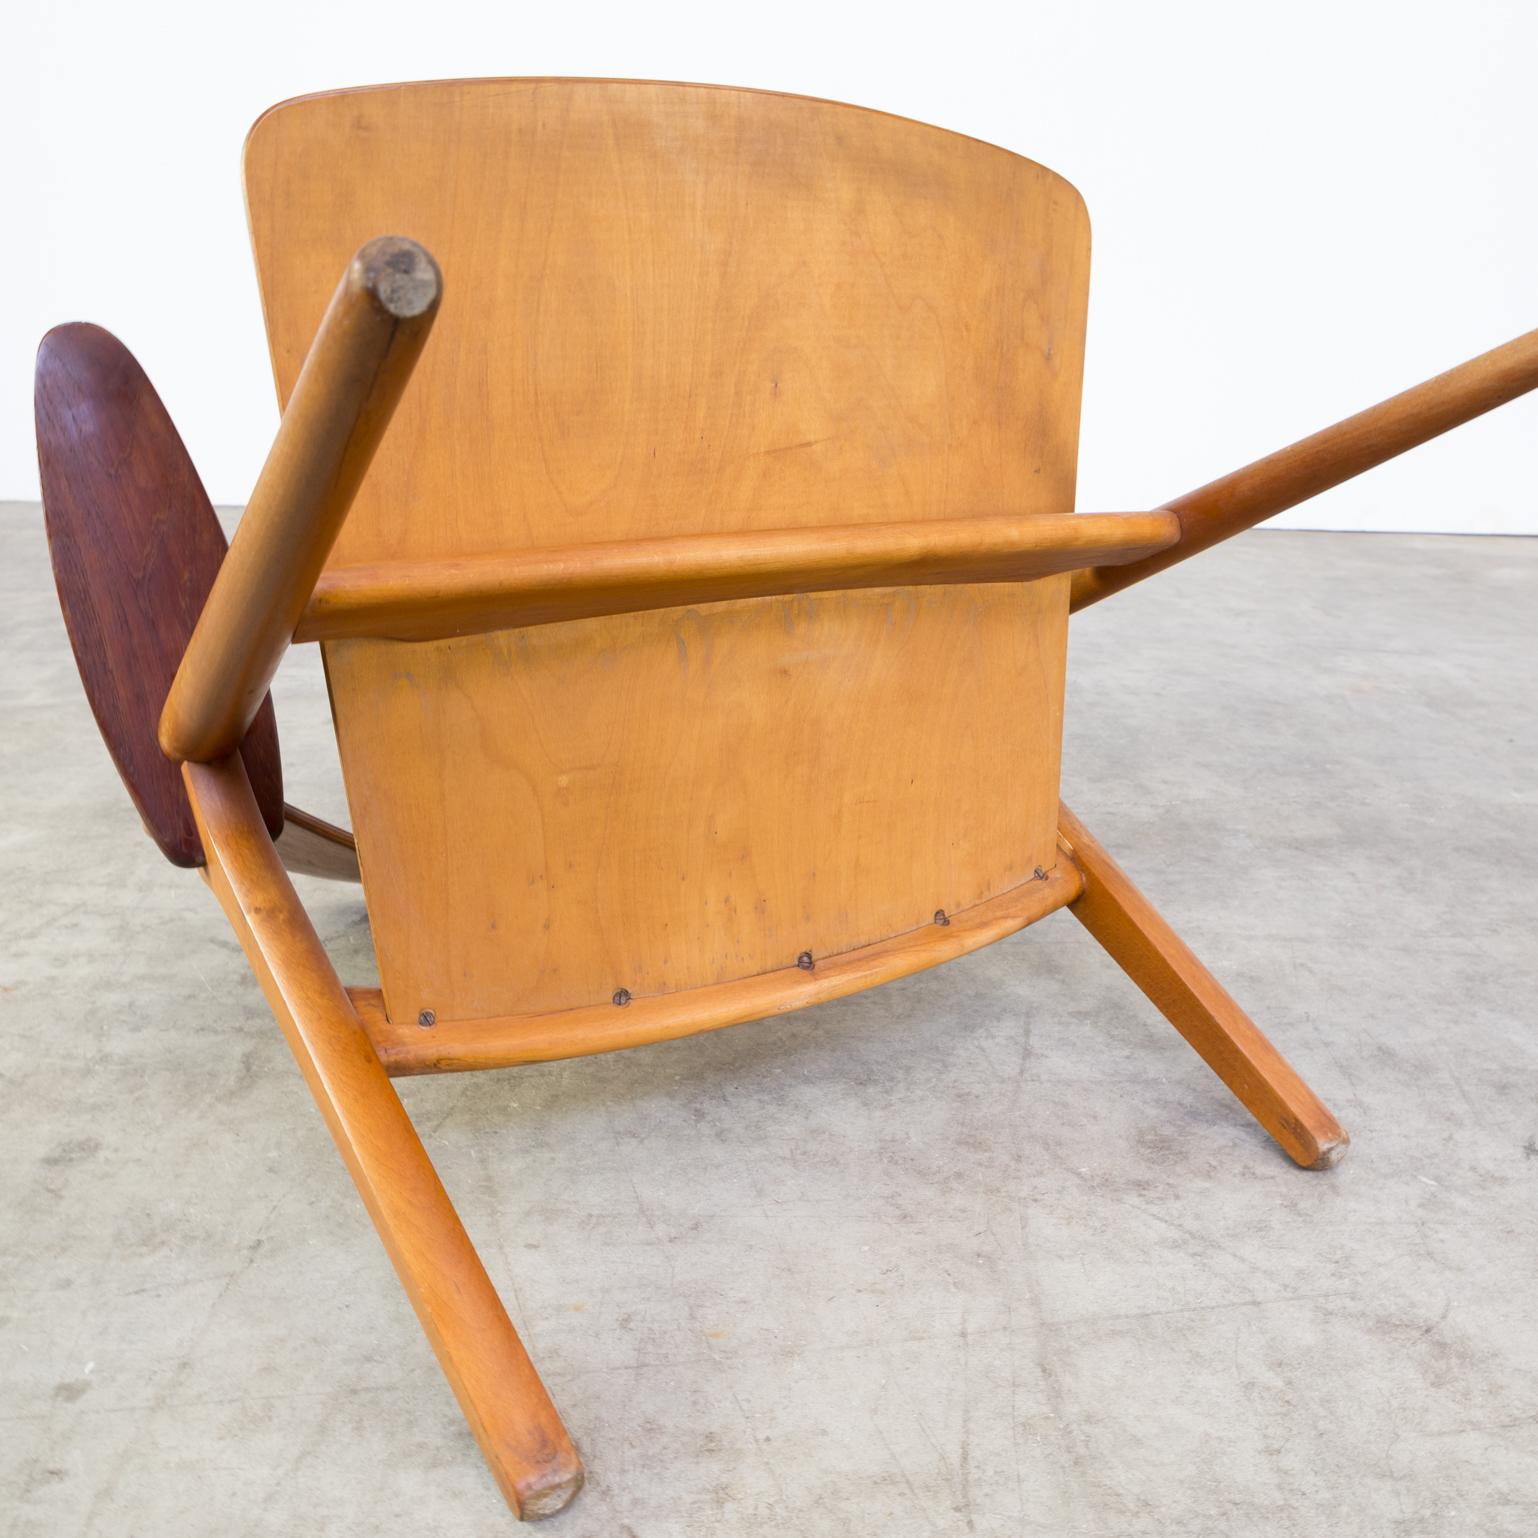 1950s Hans Wegner ‘Ch28t’ Fauteuil for Carl Hansen & Søn Set of Two For Sale 5